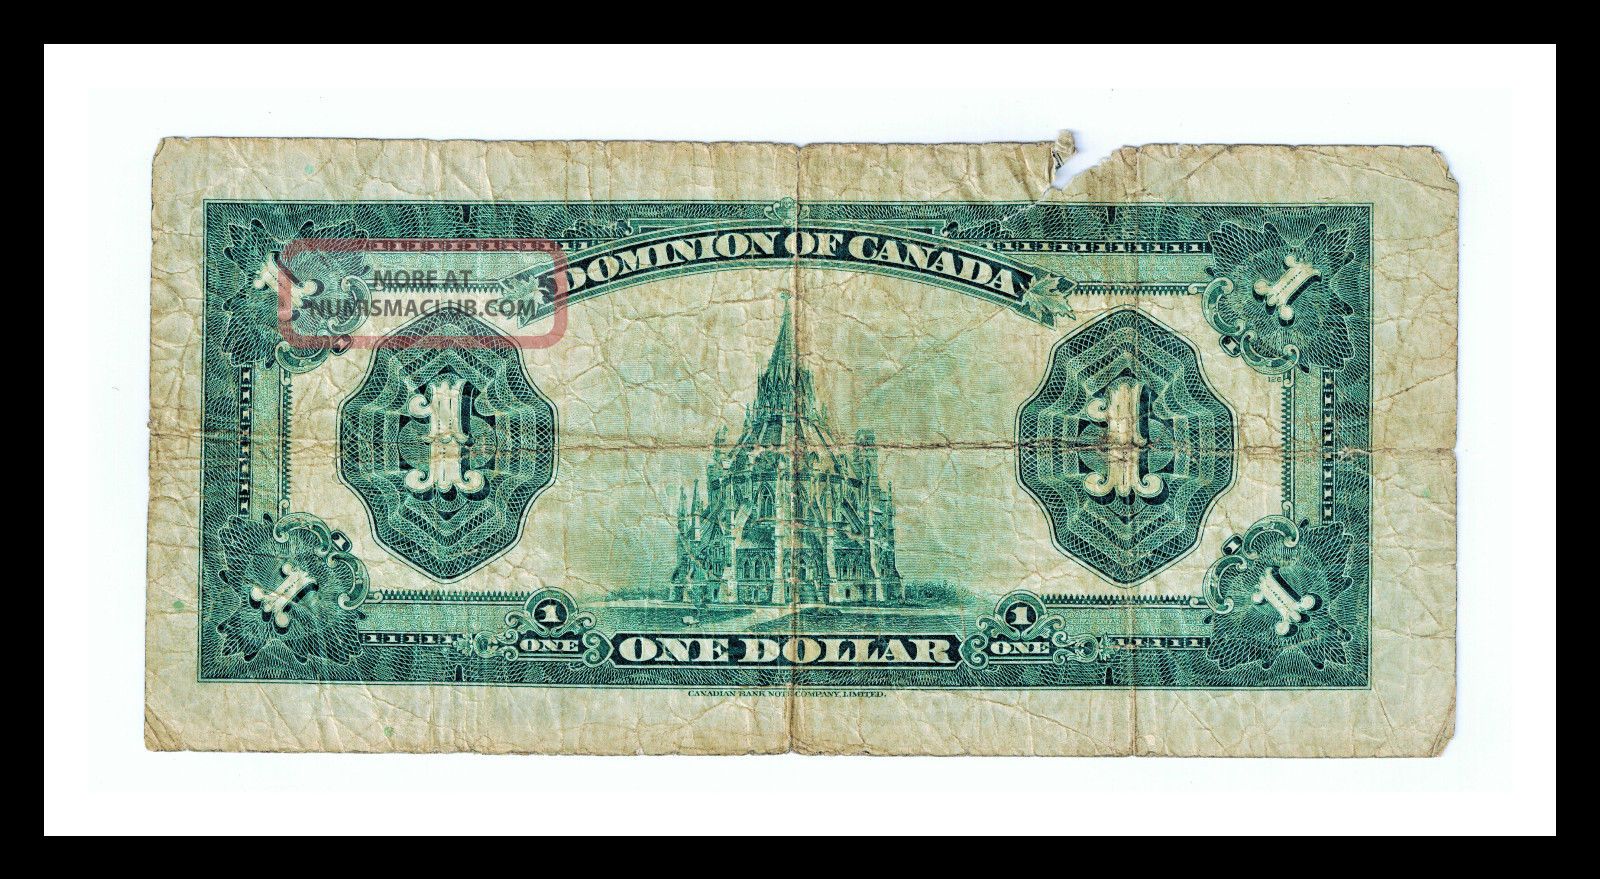 1923 The Dominion Of Canada $1 Dollar Banknote